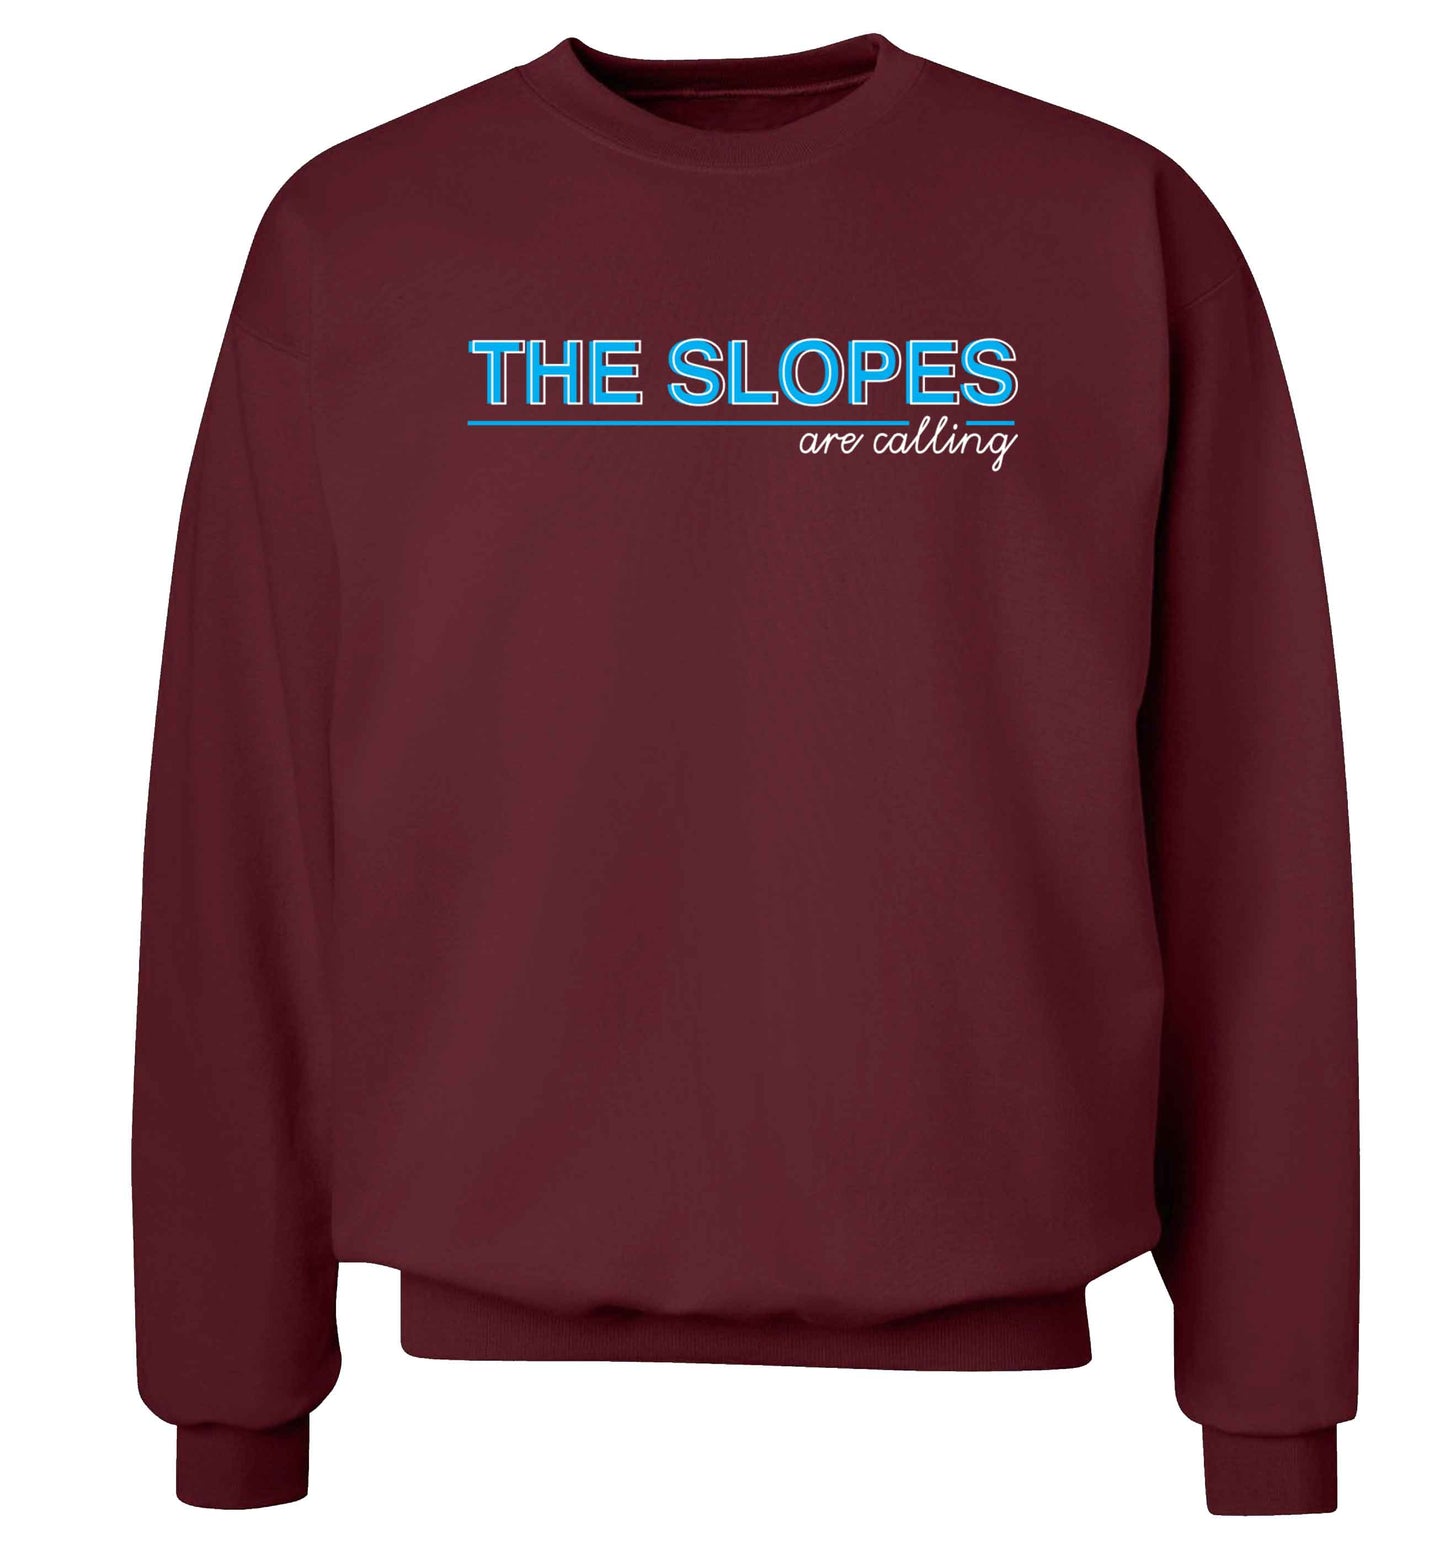 The slopes are calling Adult's unisex maroon Sweater 2XL